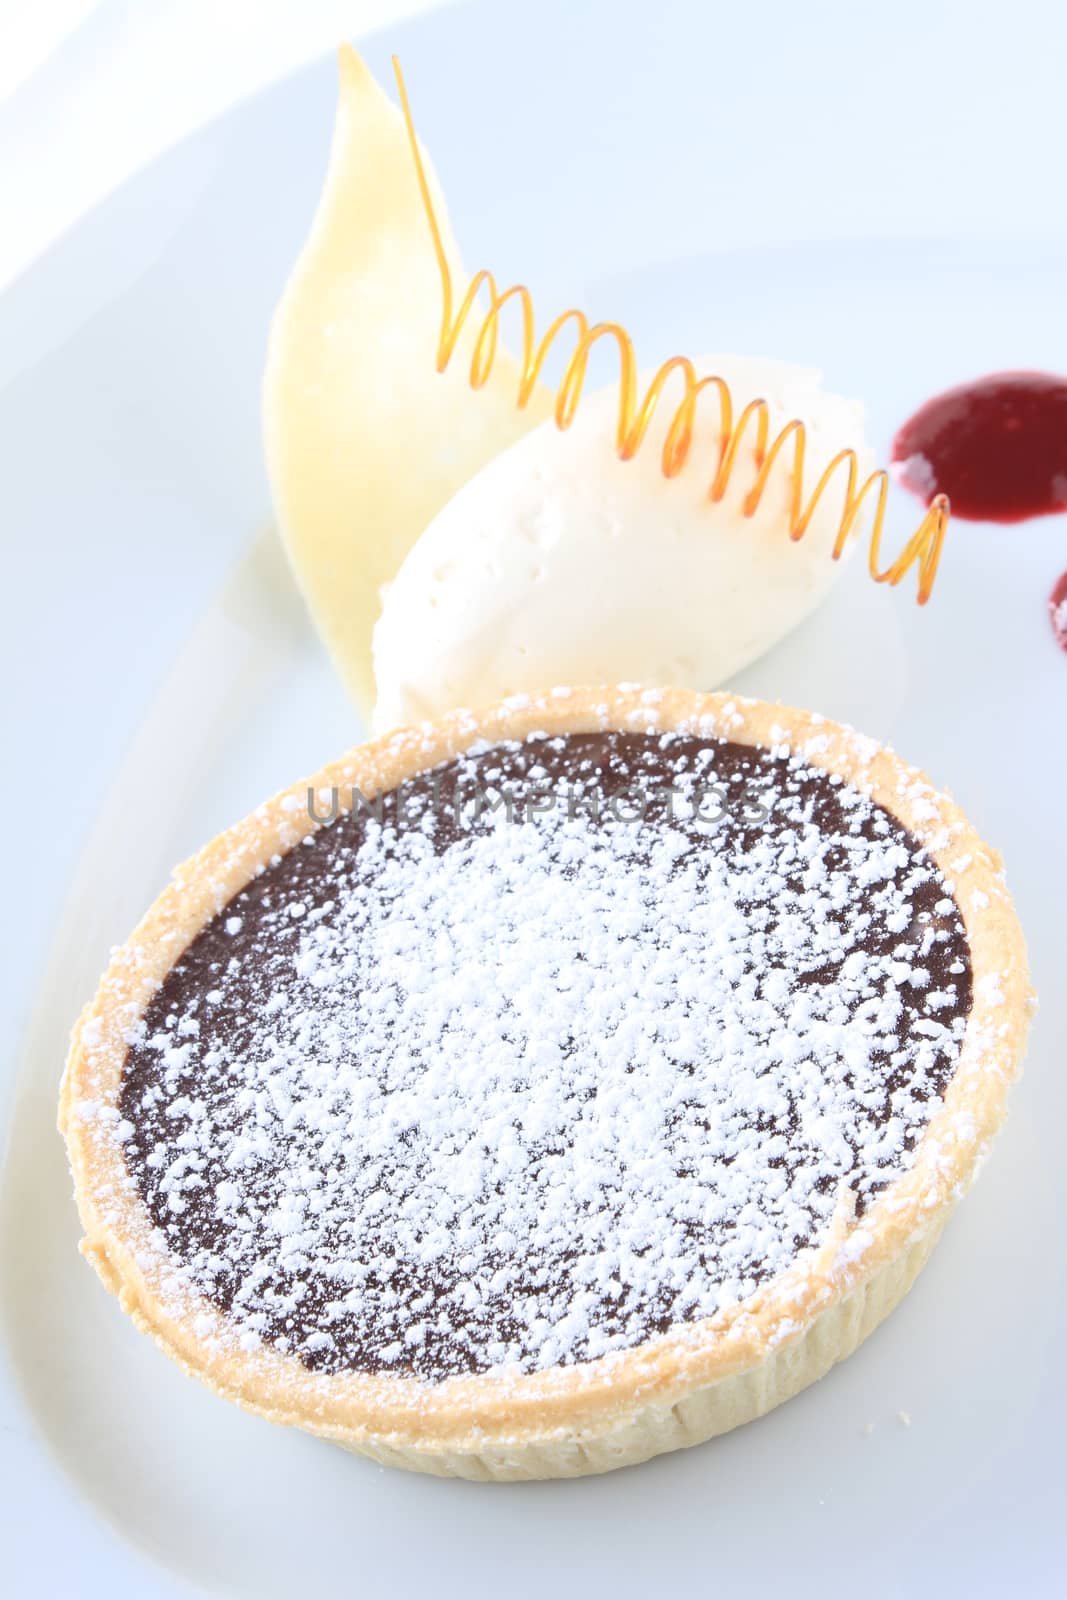 chocolate tart dessert with coulis